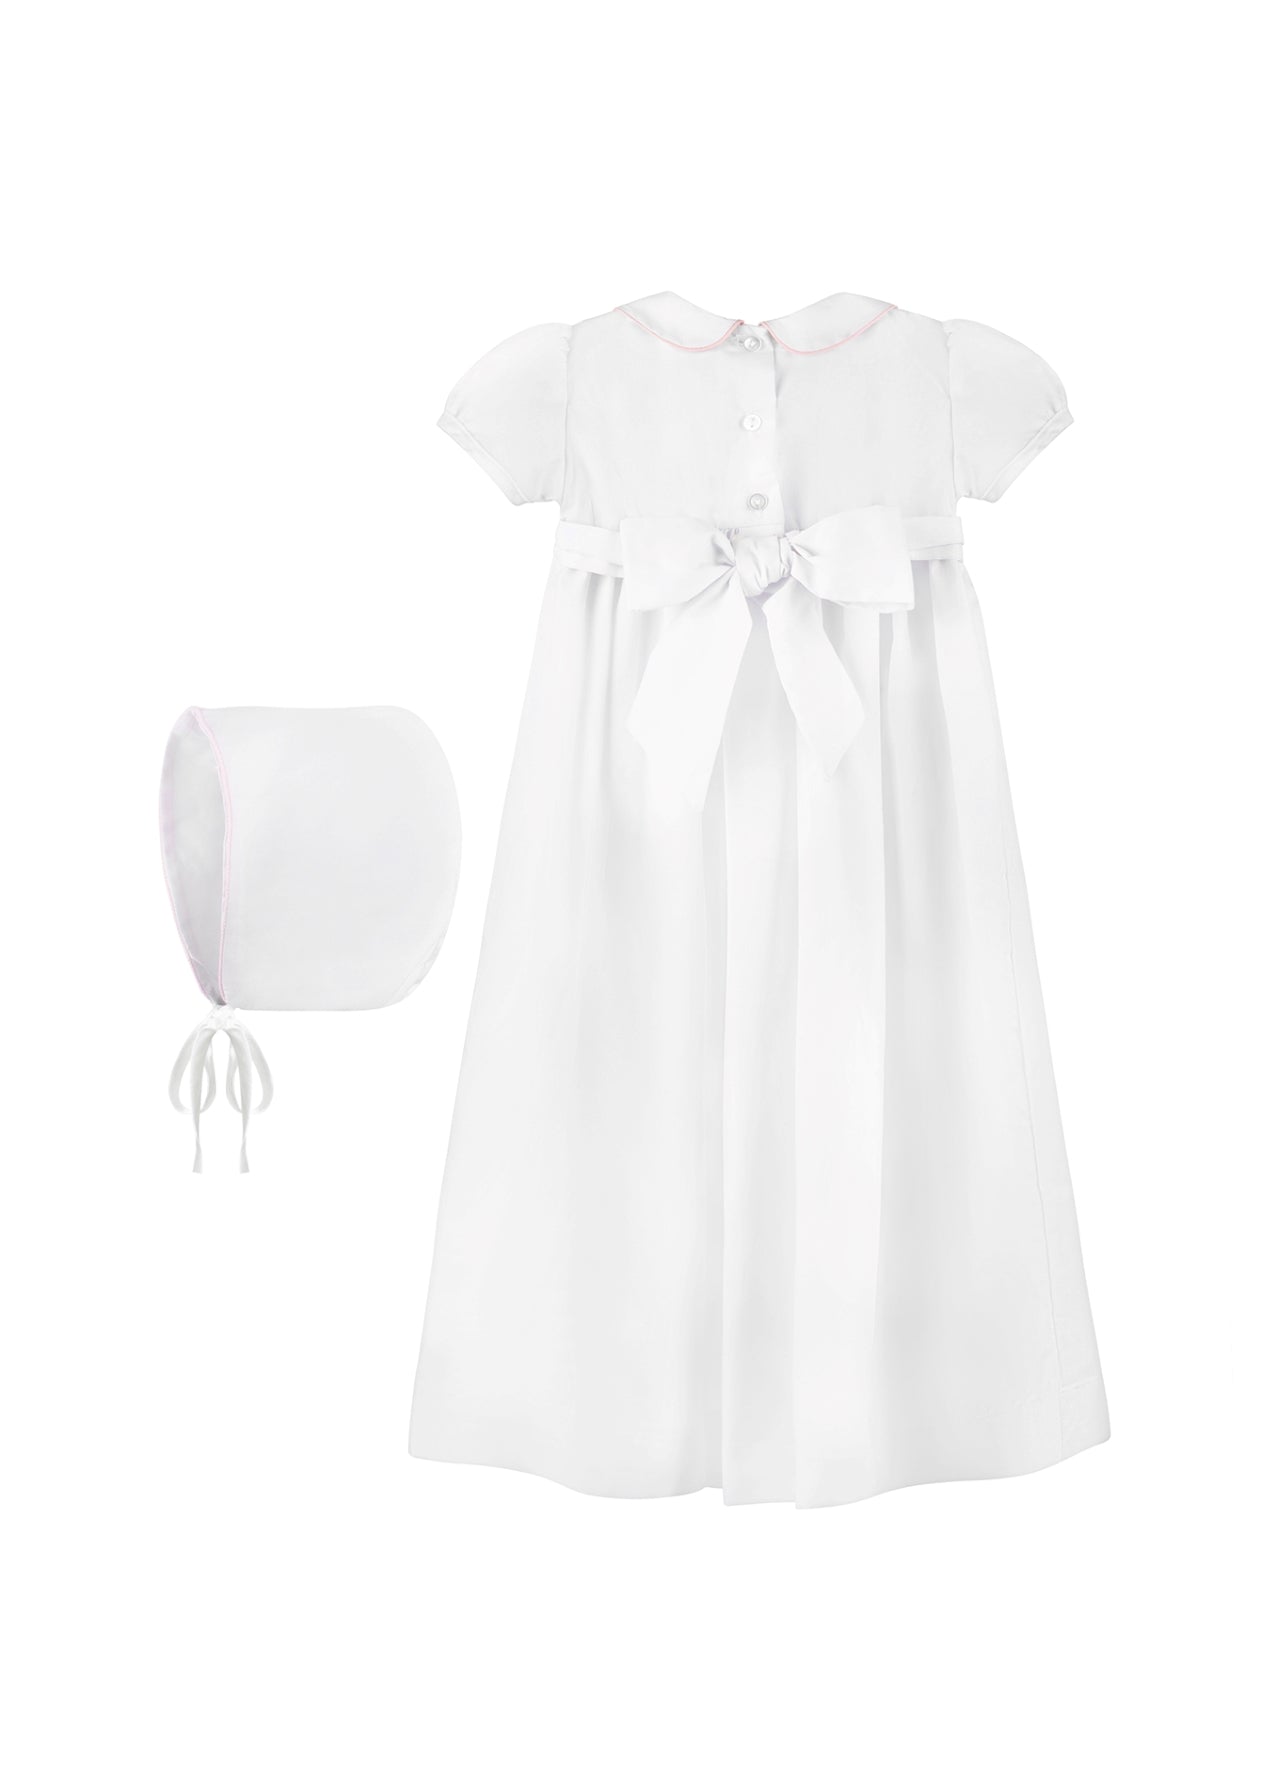 Smocked Pink Cross Baby Girl Christening & Baptism Gown with Bonnet 3 - Imagewear